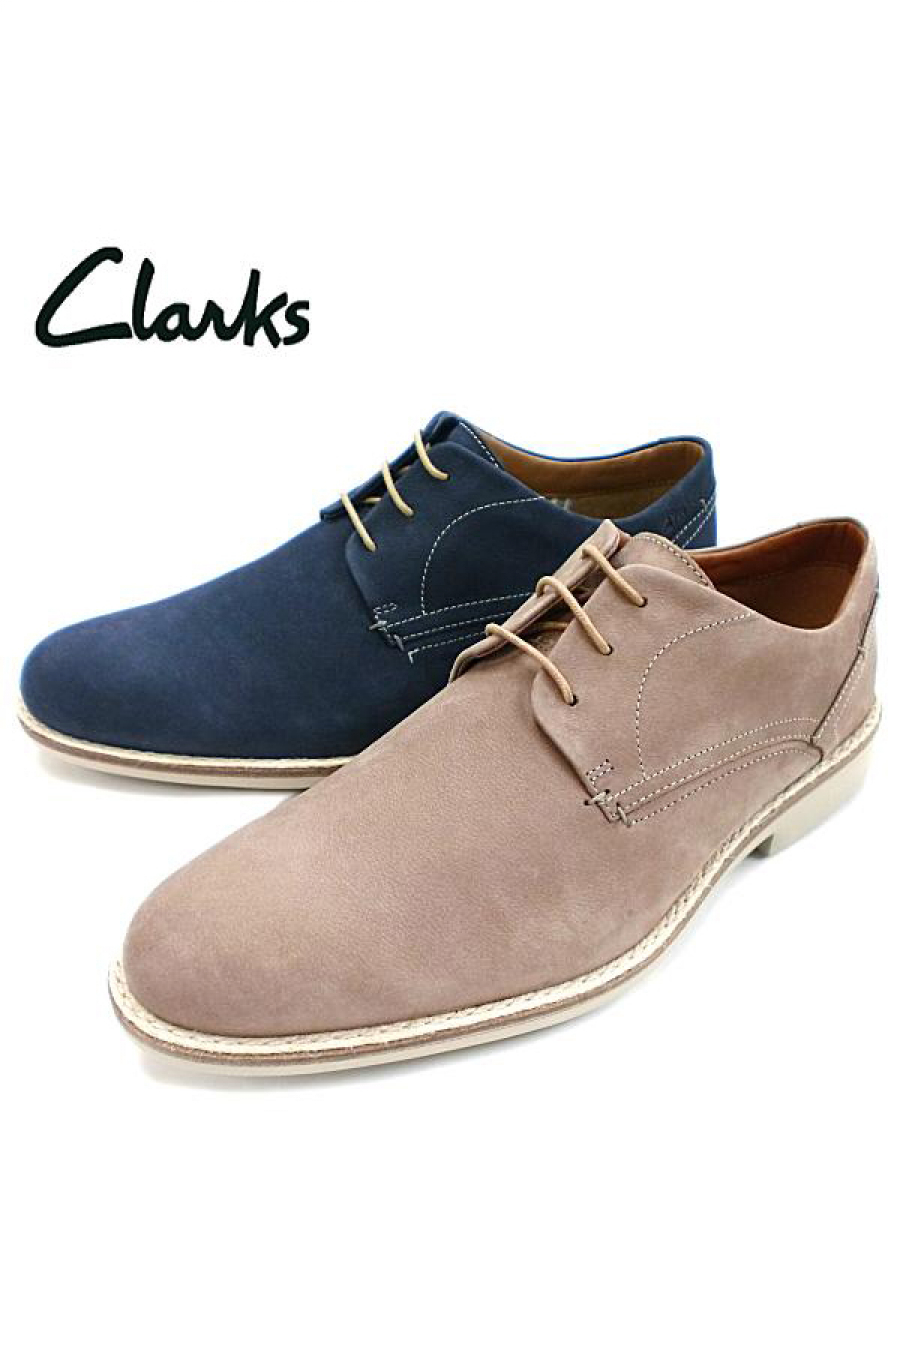 new clarks shoes 2018